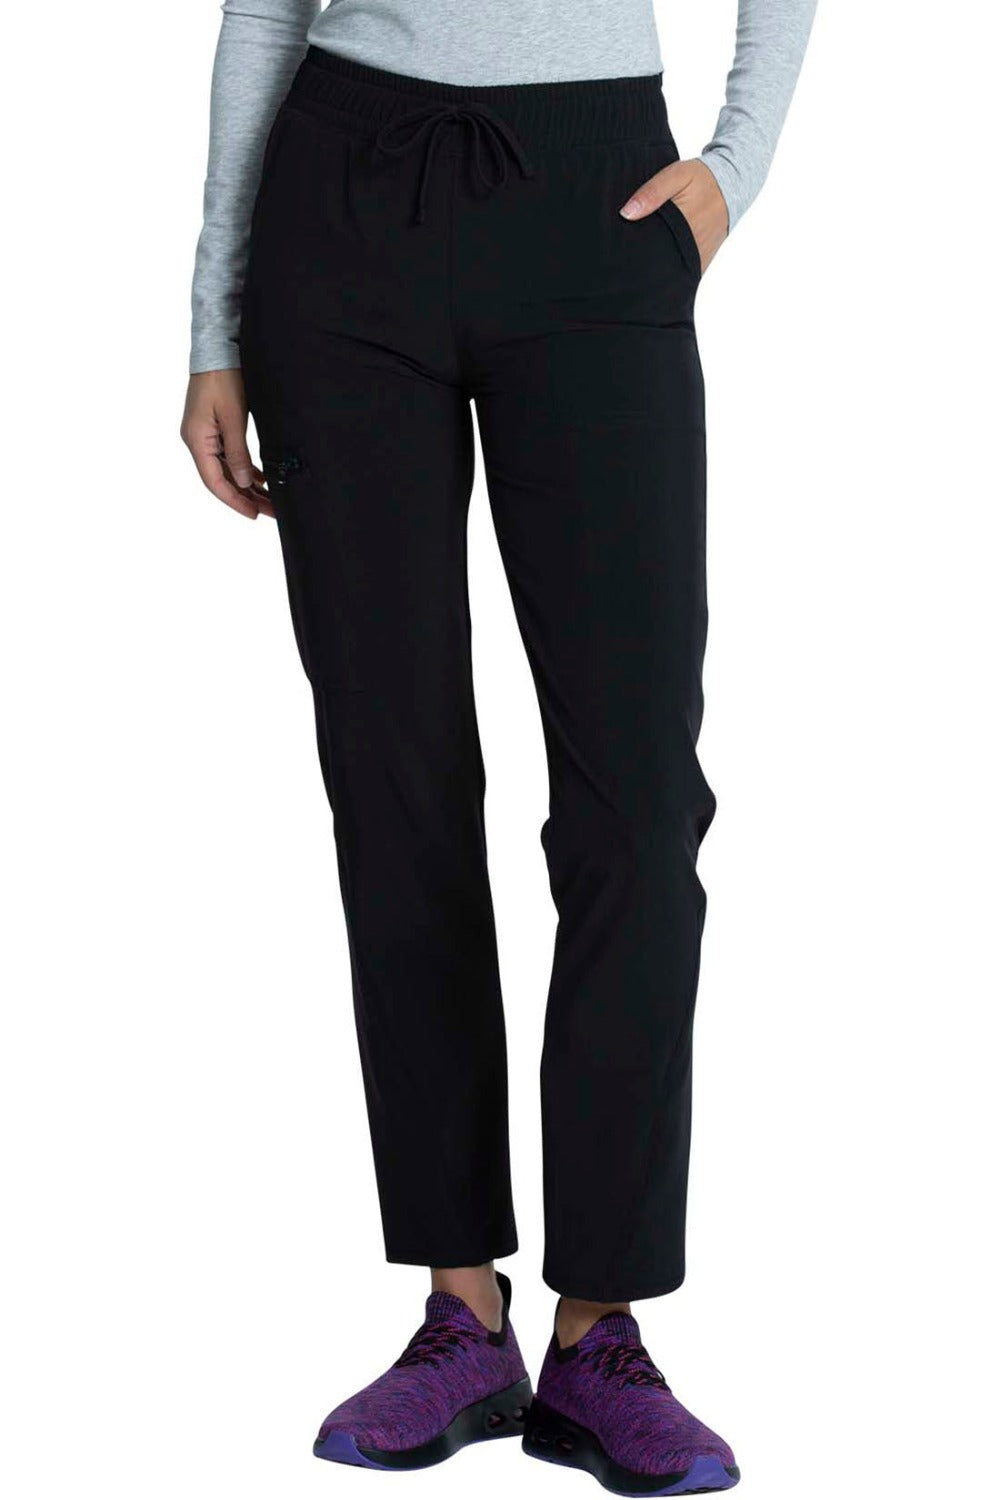 Cherokee Allura Petite Scrub Pant Mid Rise Tapered Leg Drawstring in Black at Parker's Clothing and Shoes.